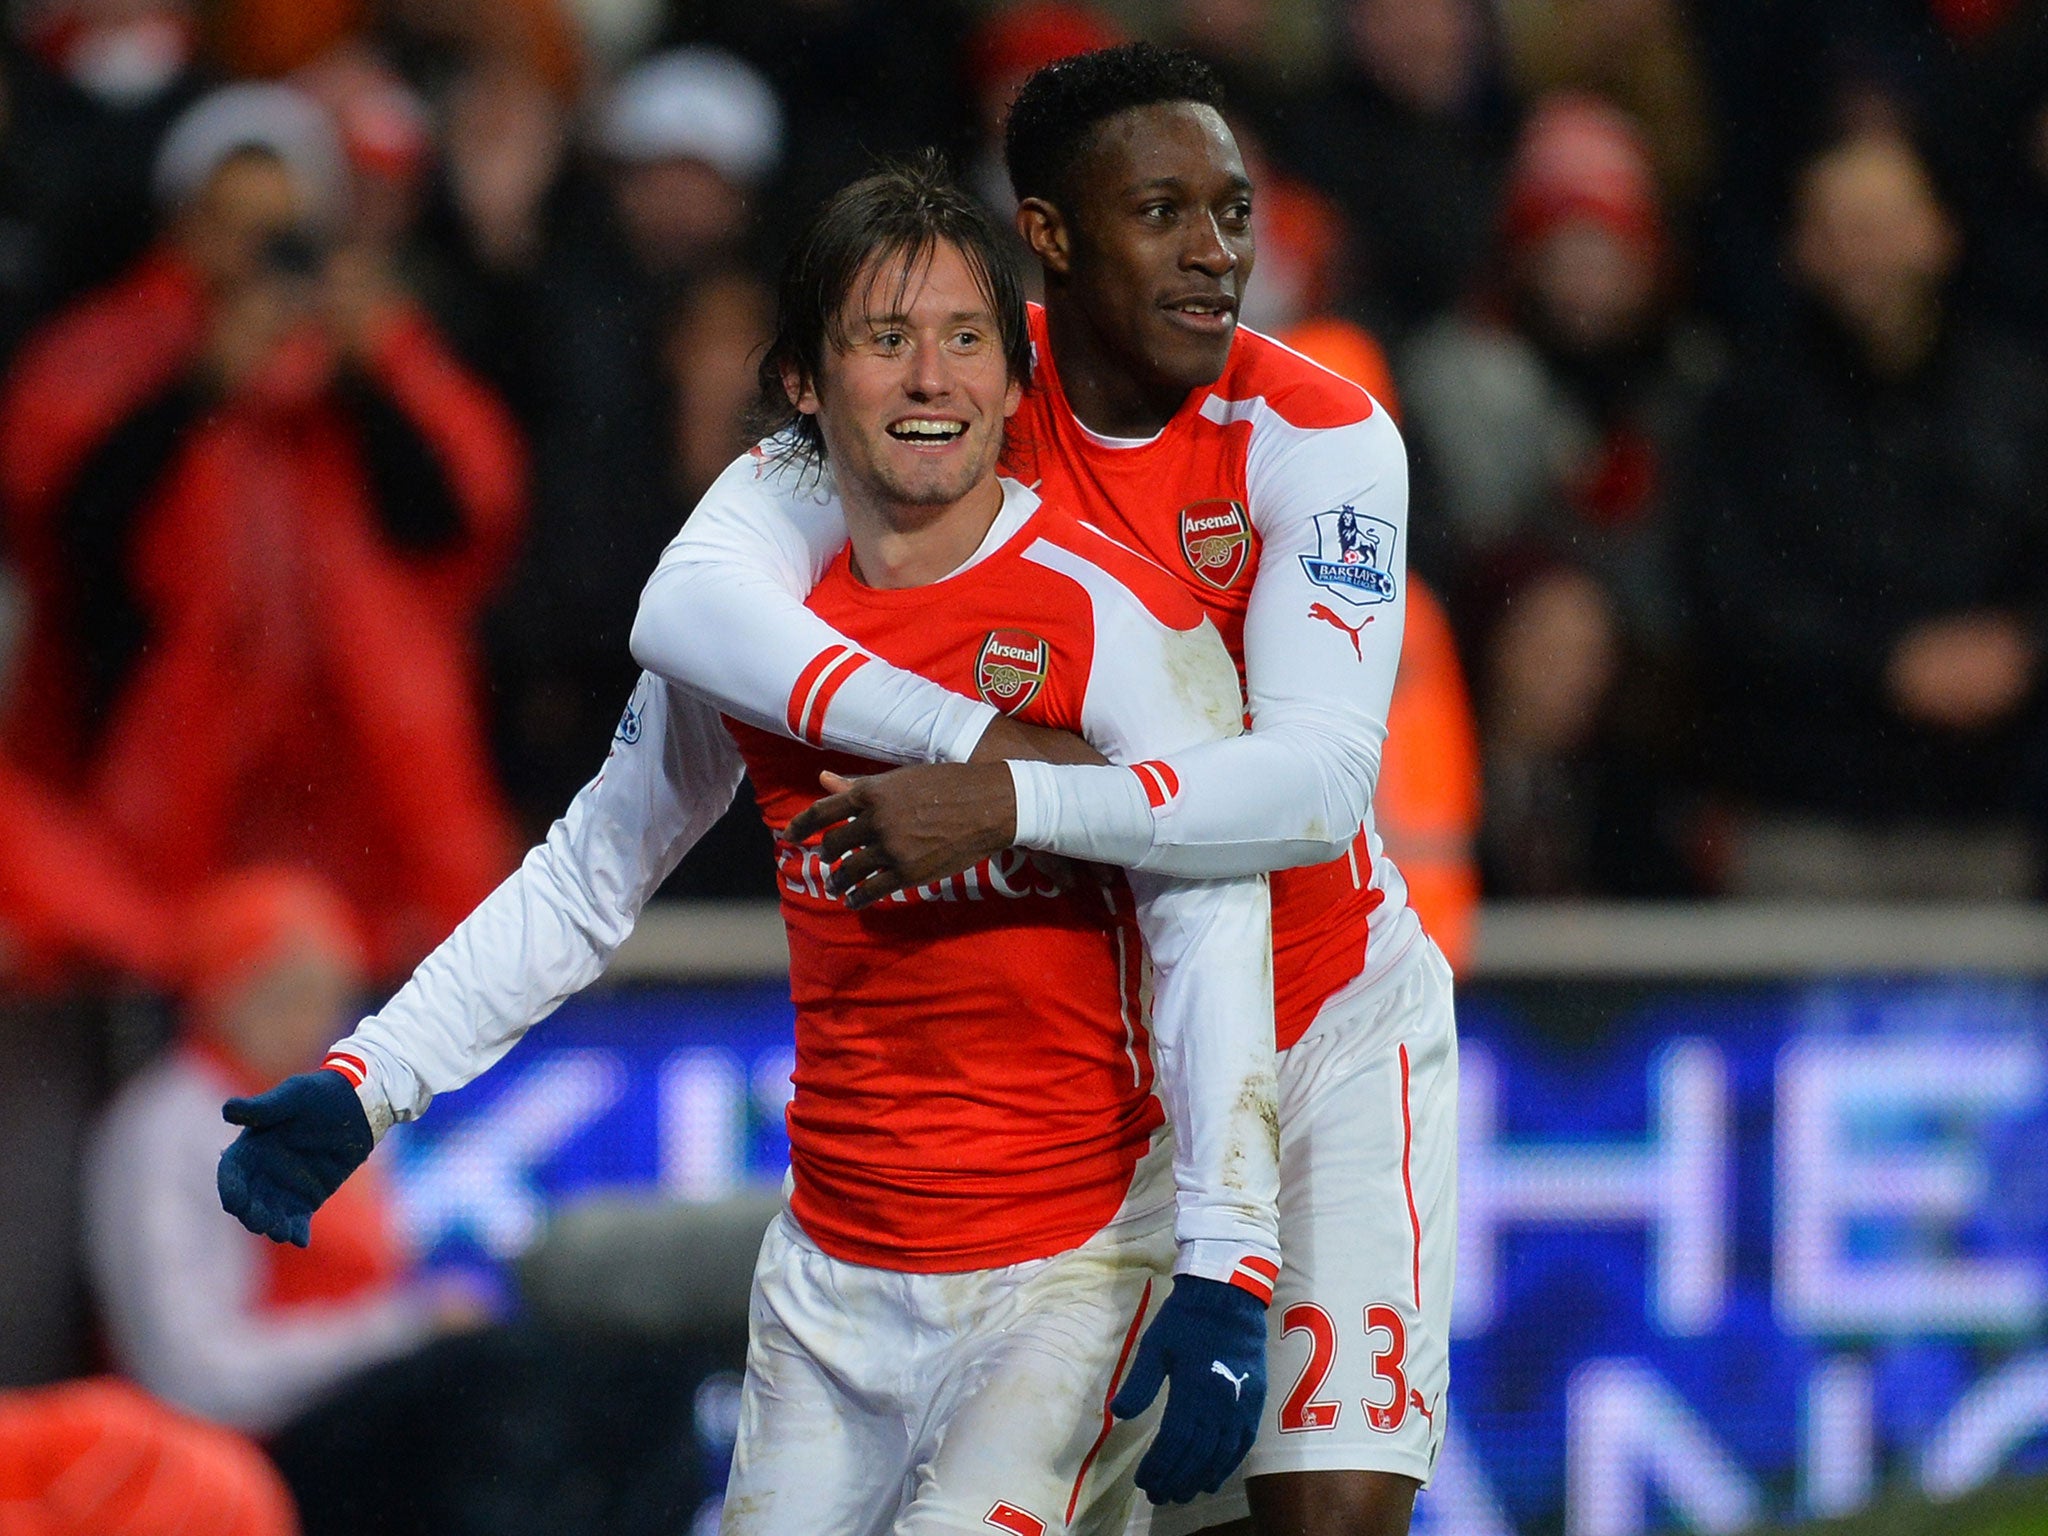 Rosicky celebrates with Welbeck after scoring Arsenal's second